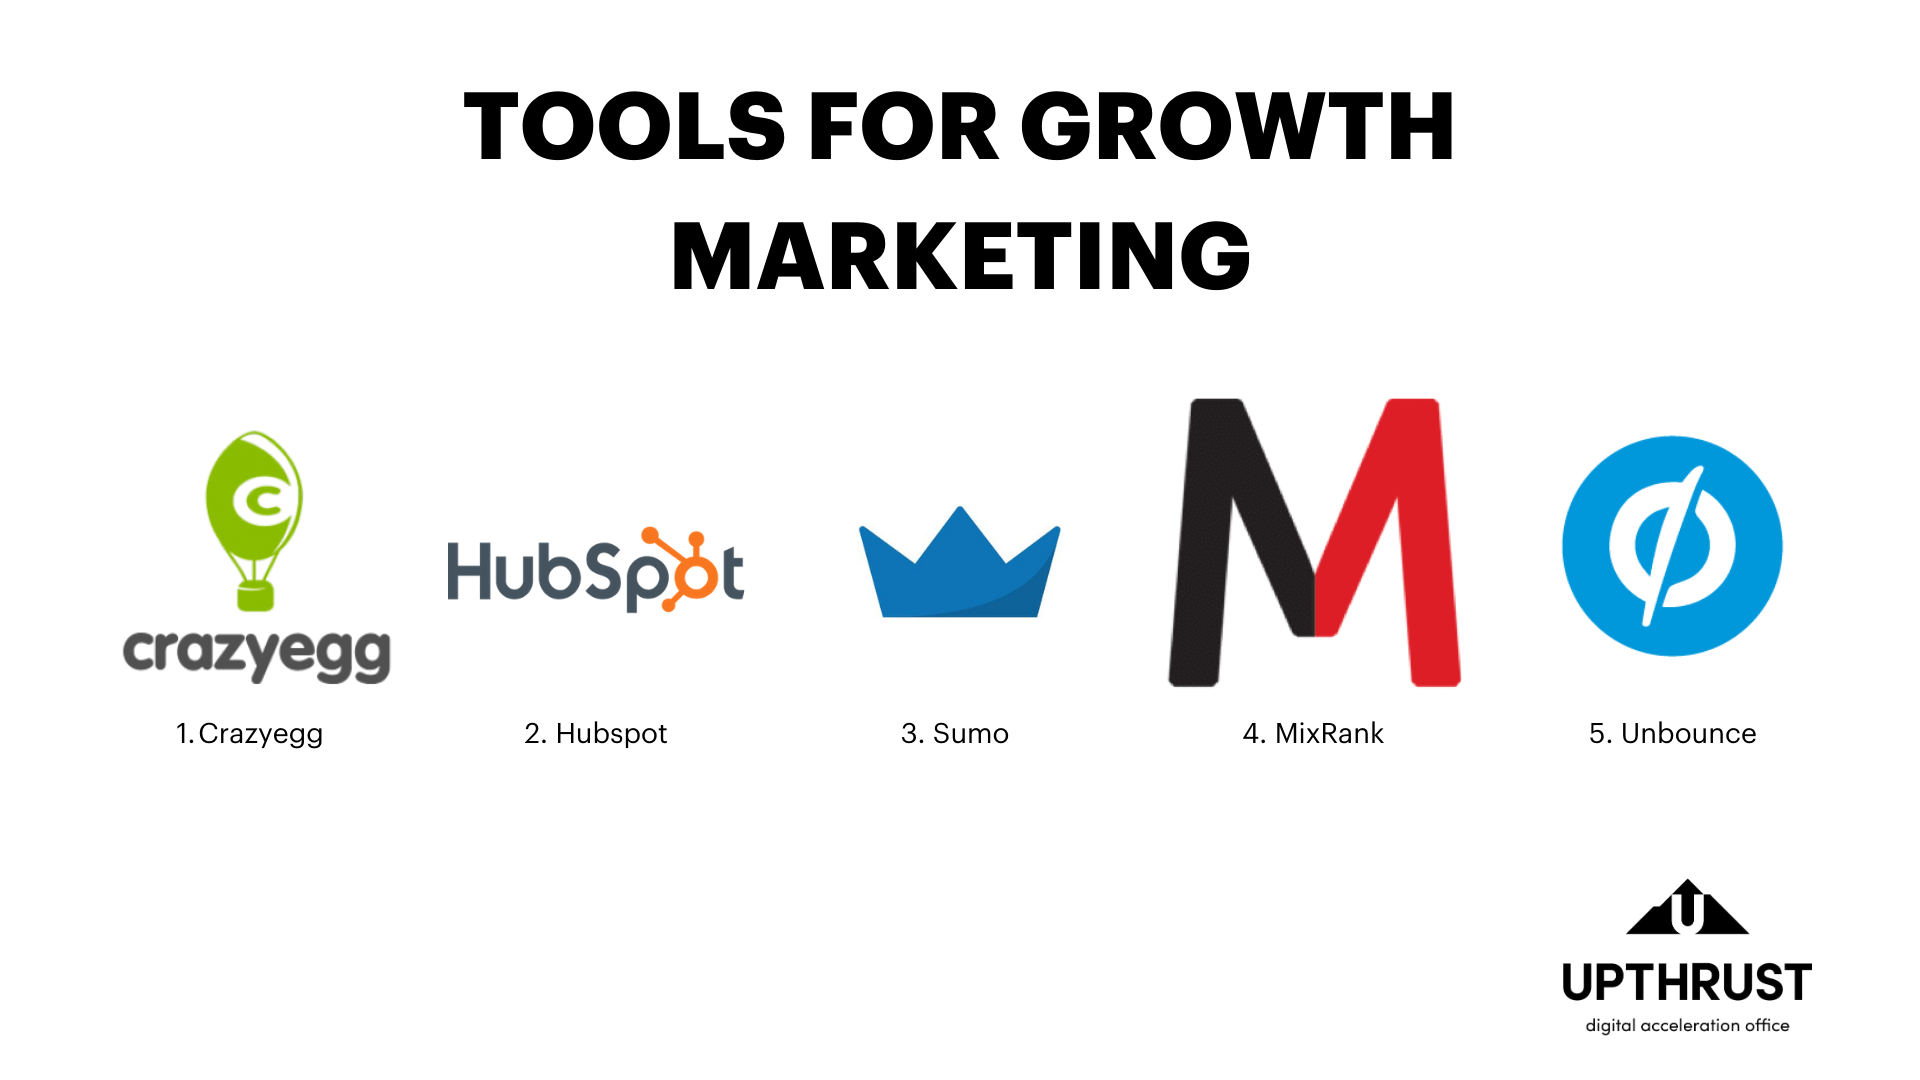 Best tools for Growht Marketing.